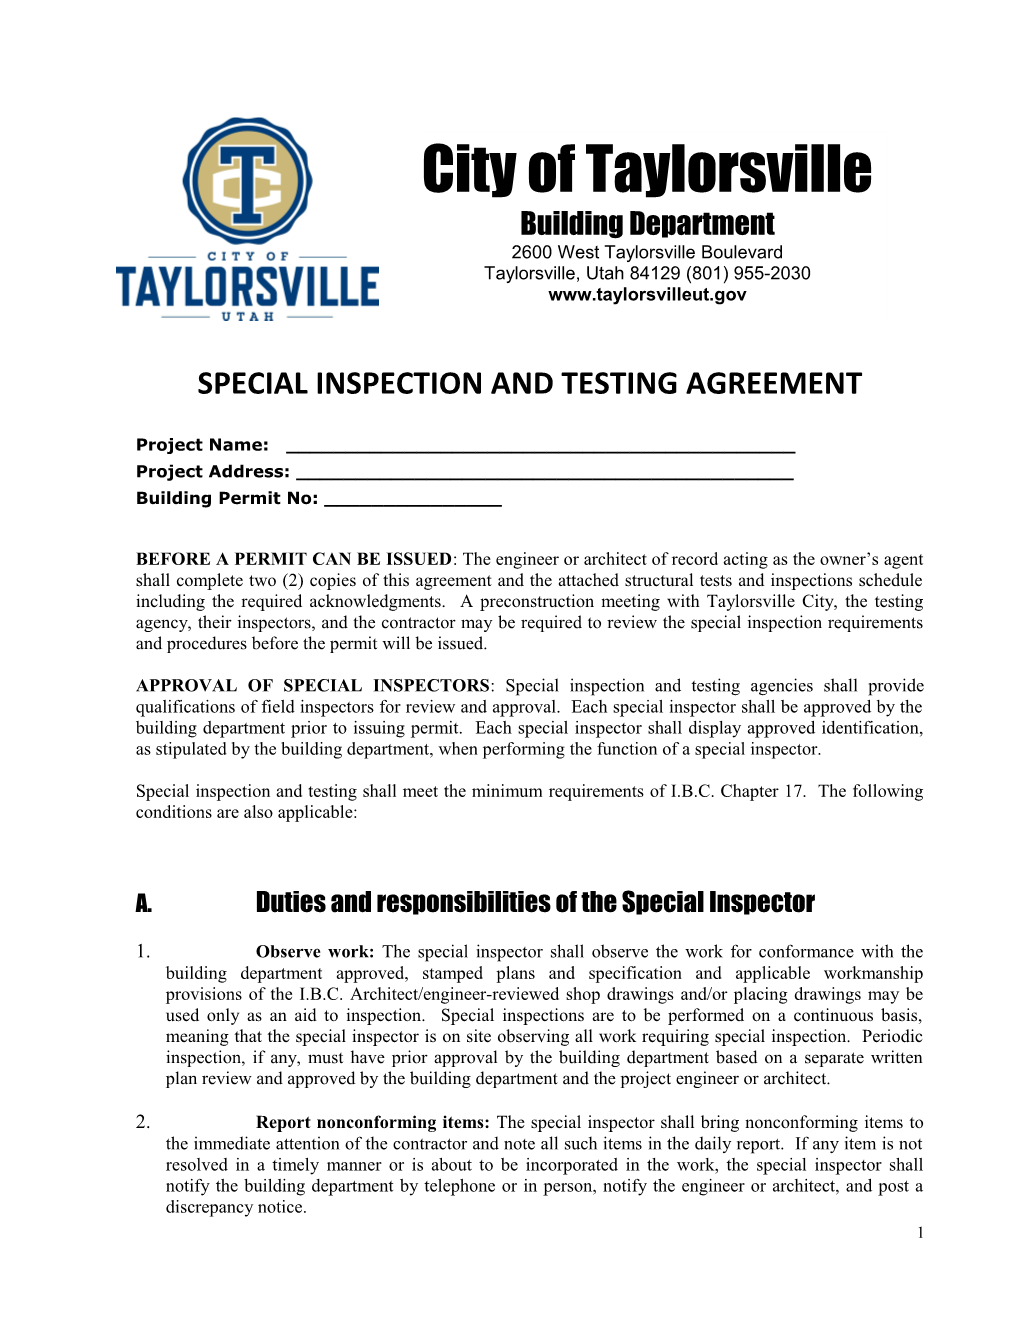 Special Inspection and Testing Agreement